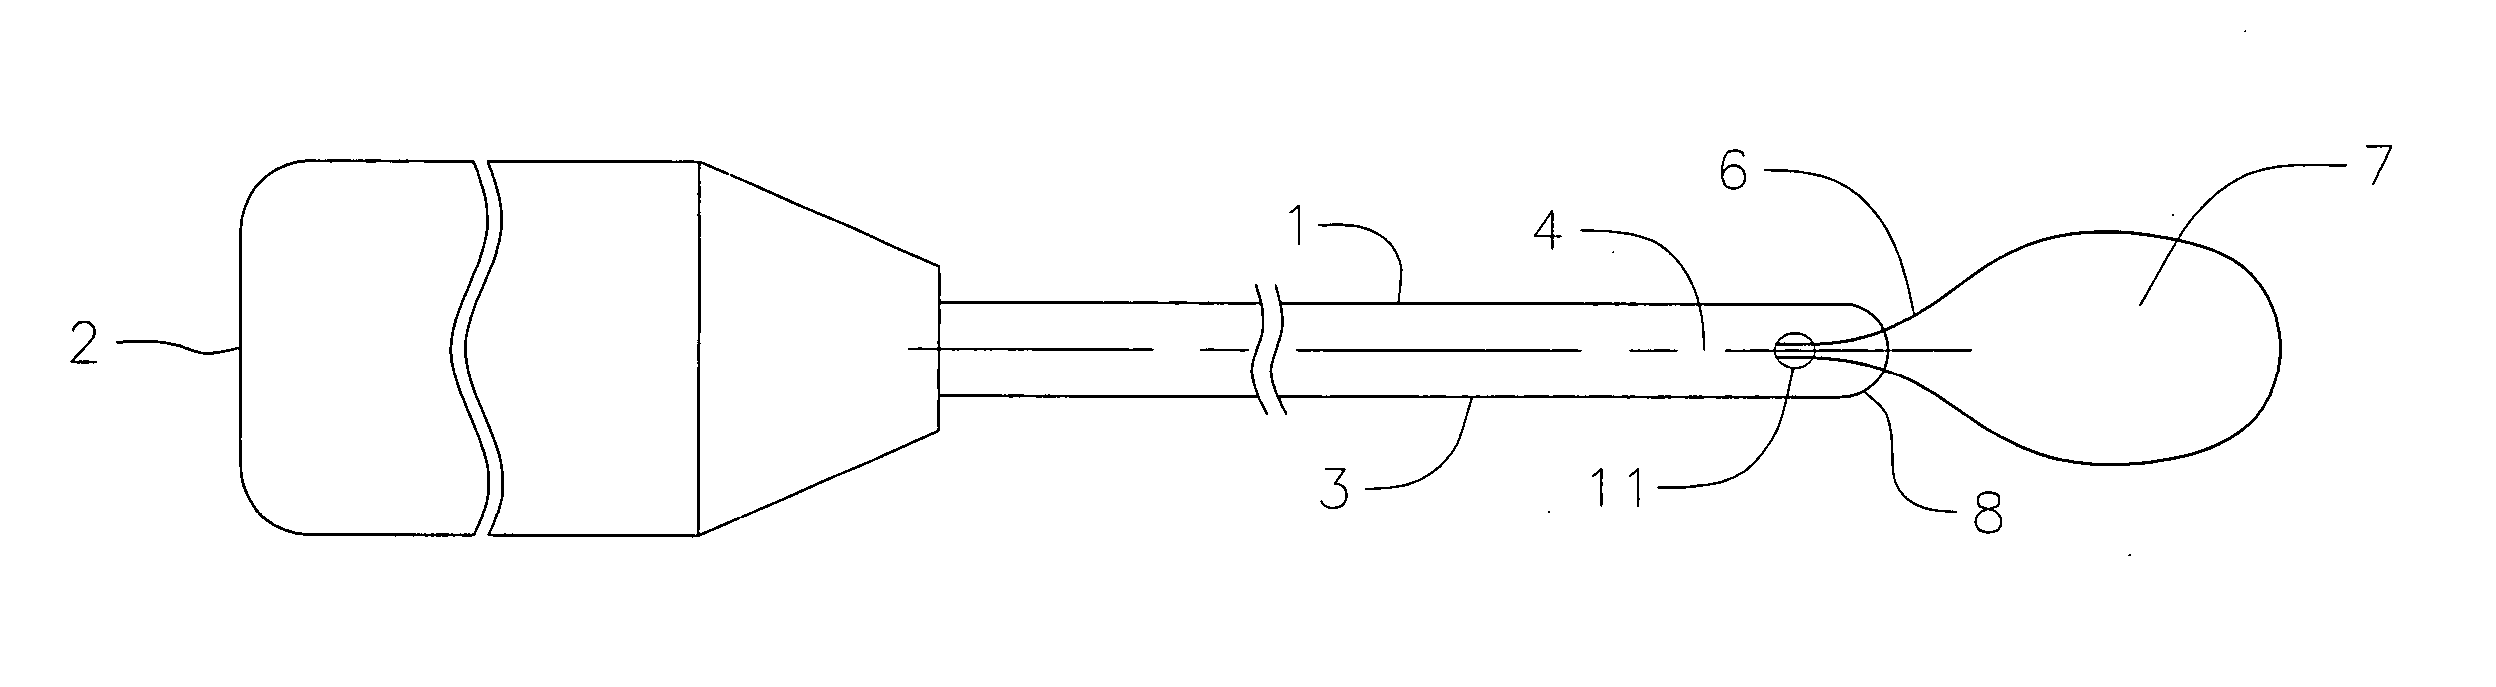 Suture passer device for abdominal or thoracoscopic surgery